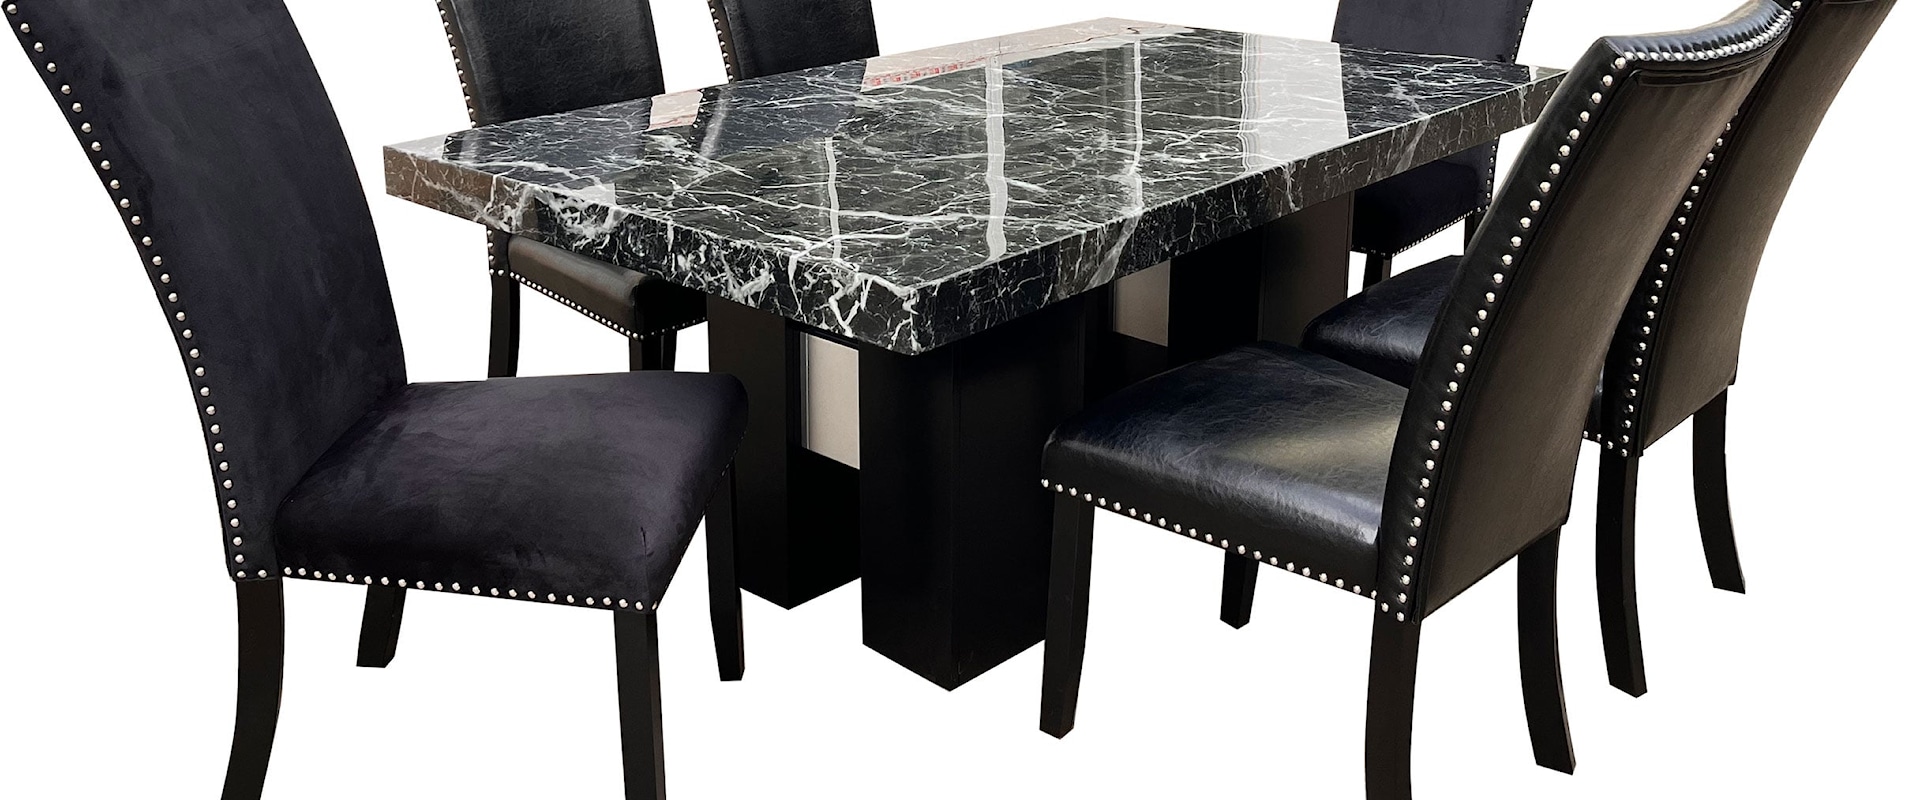 Contemporary Dining Table with 4 Dining Chairs